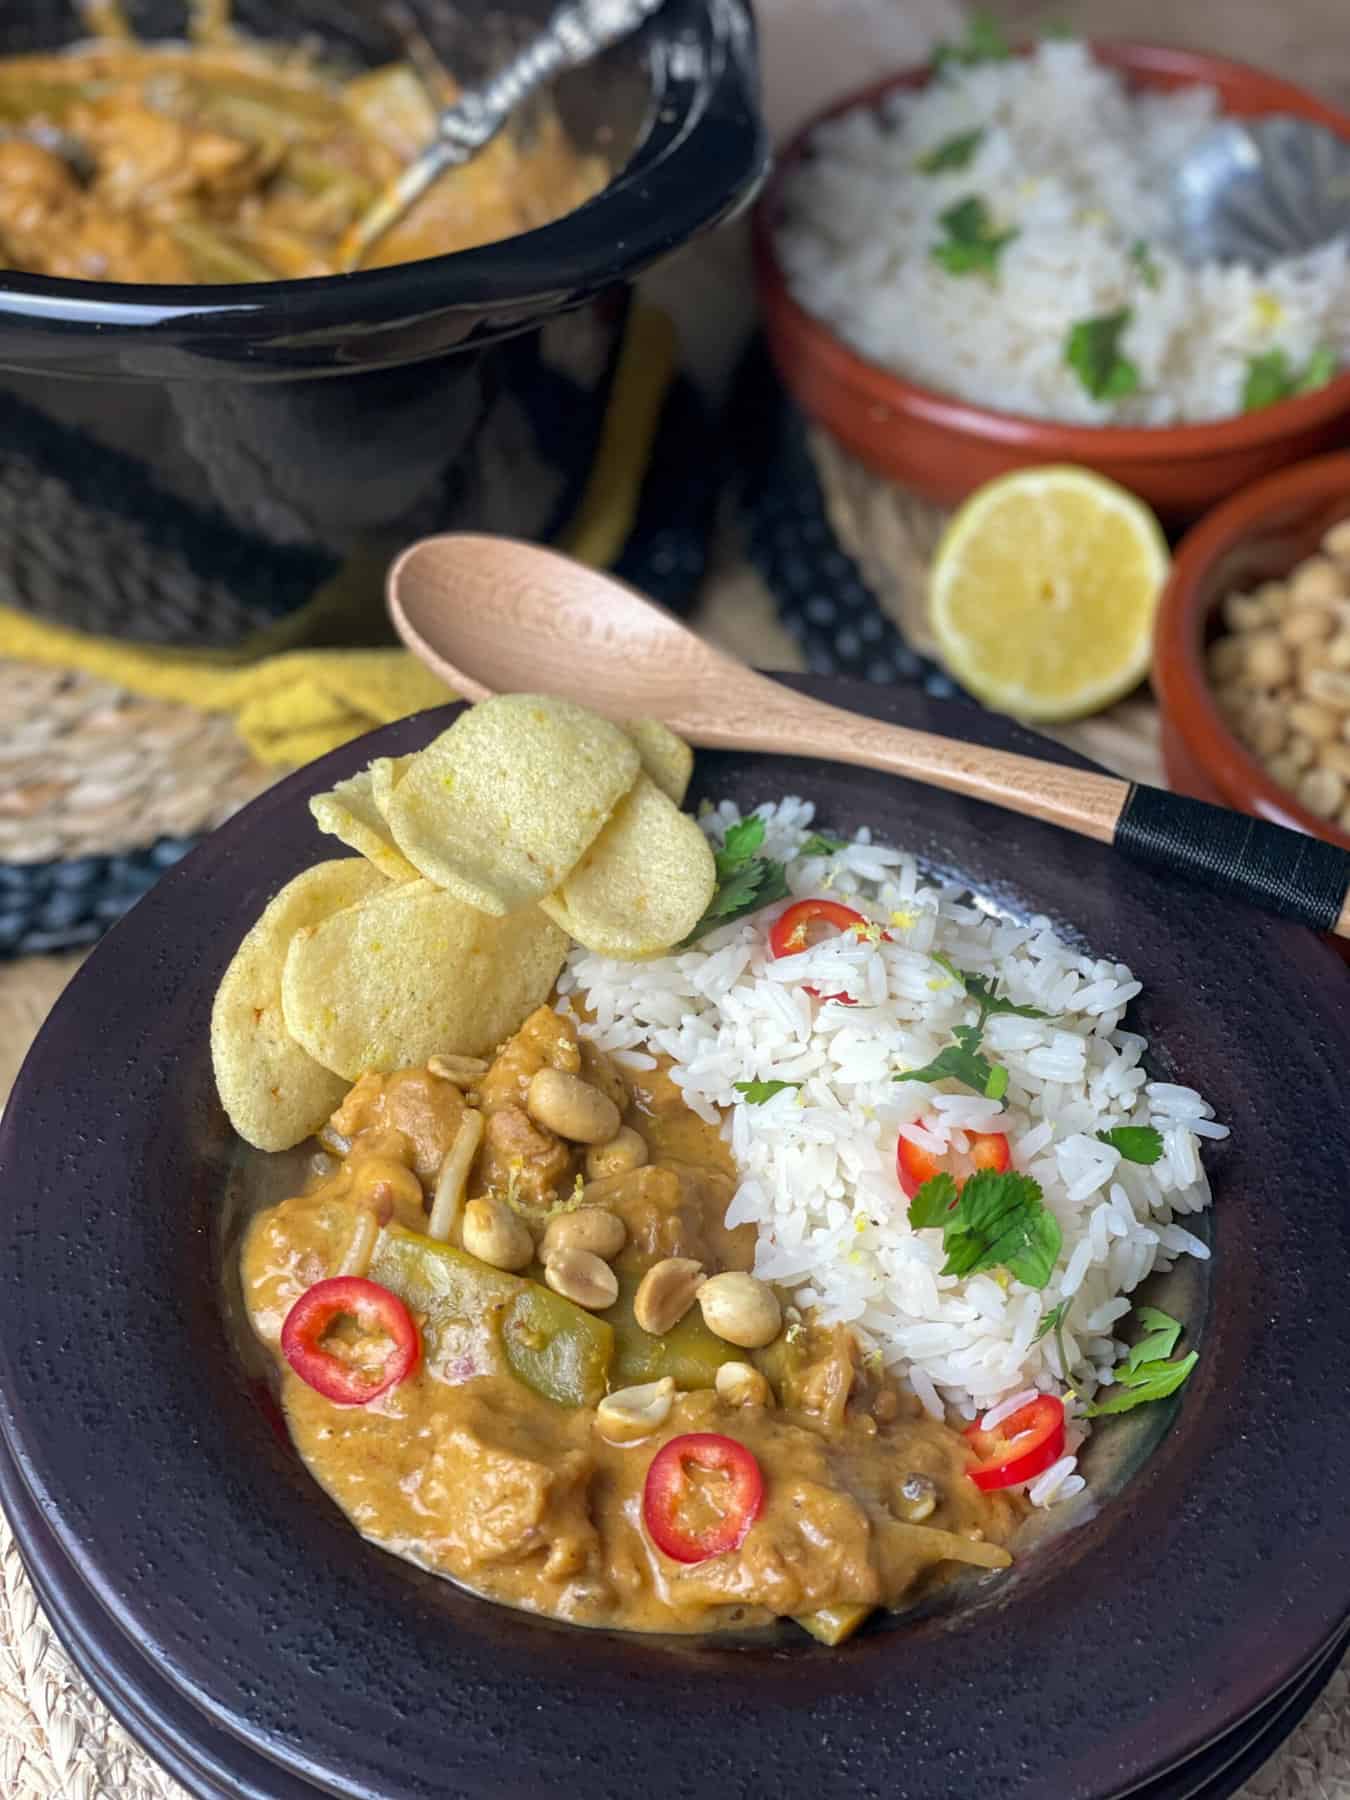 A close up bowl of Thai red curry with a wooden spoon on side of bowl, fresh lemon to the side with small bowl of rice and slow cooker pot in background.